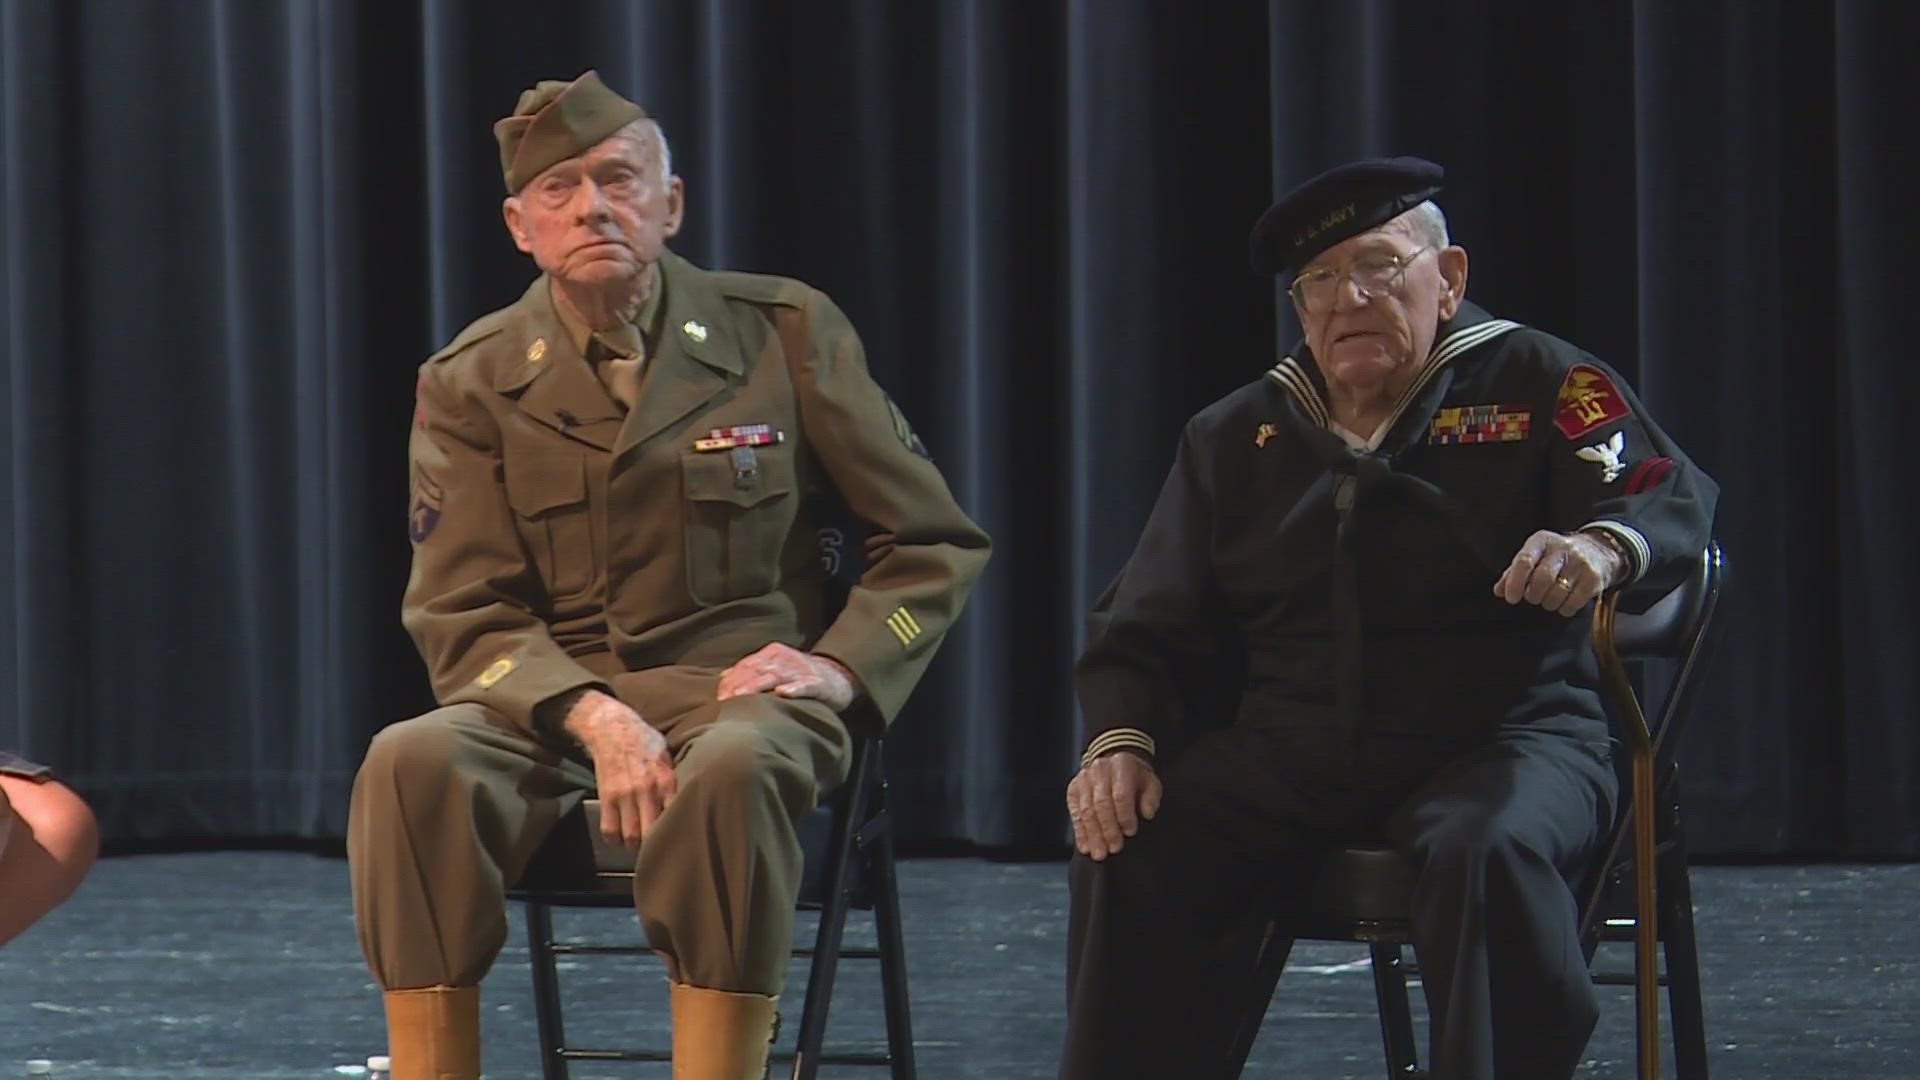 Two World War II veterans captivated students with first-hand stories of the second Great War Friday morning.